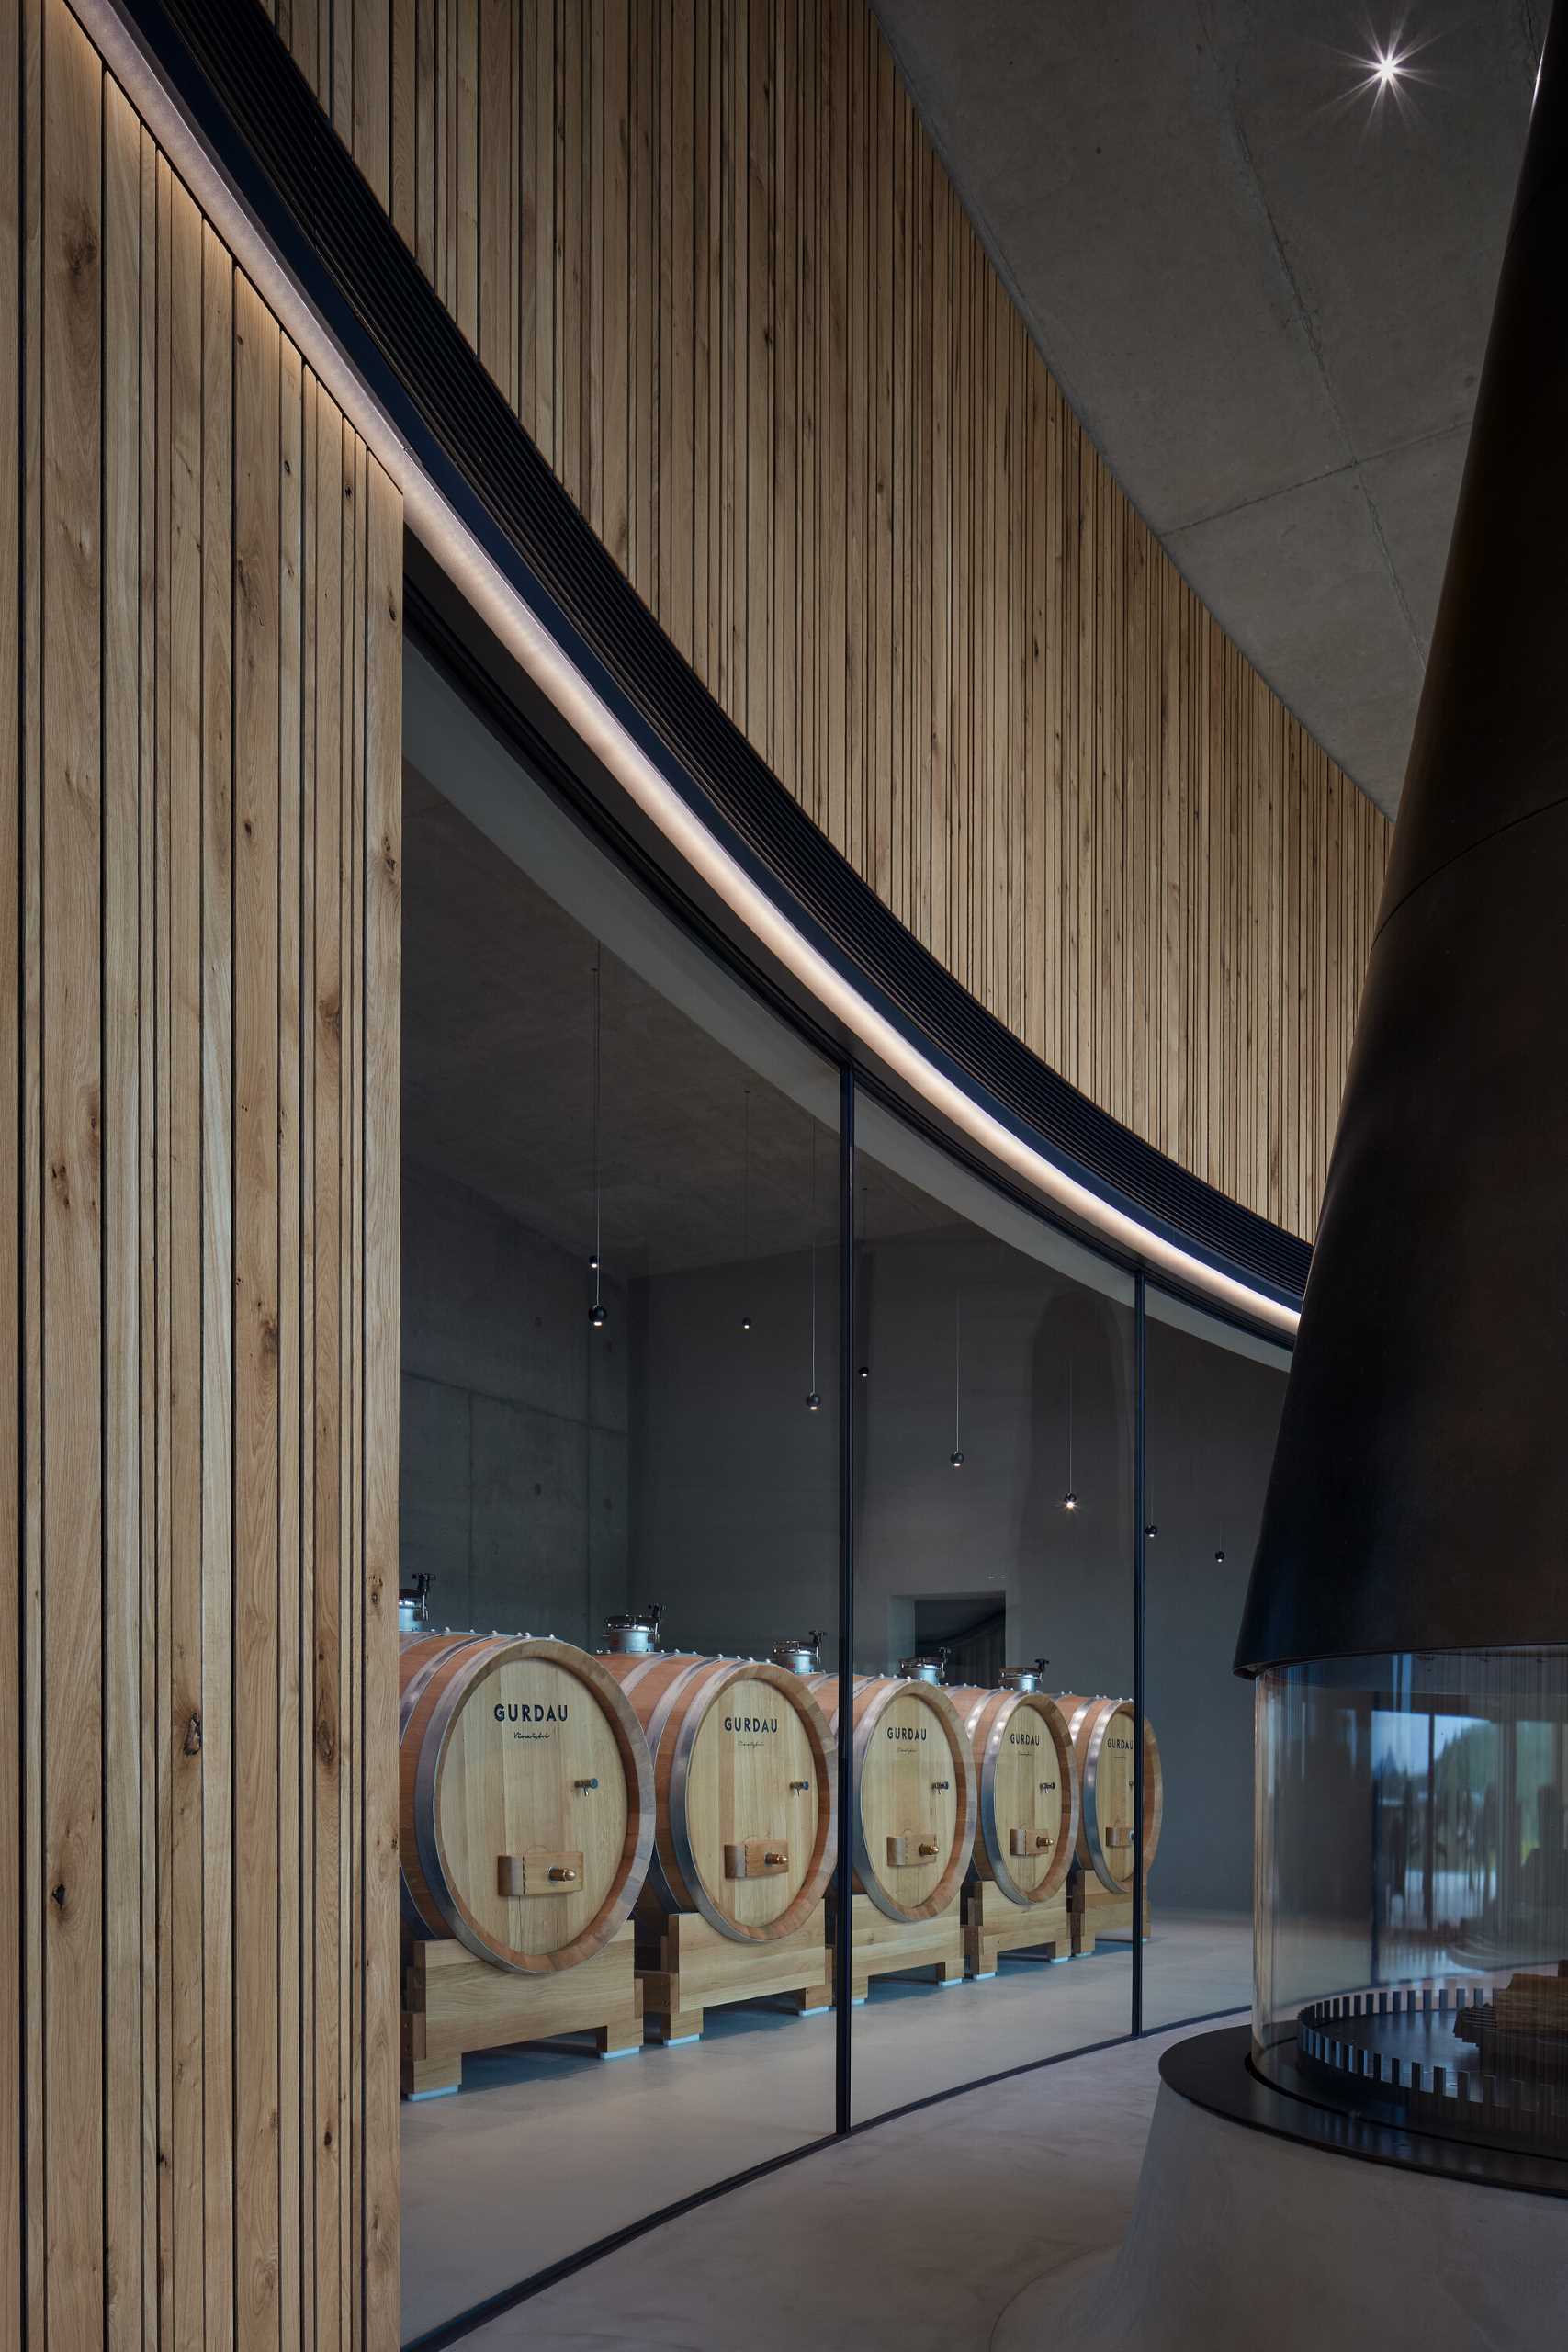 A selection of wine barrels are housed behind a curved glass wall, providing visitors with a glimpse of the wine-making process.